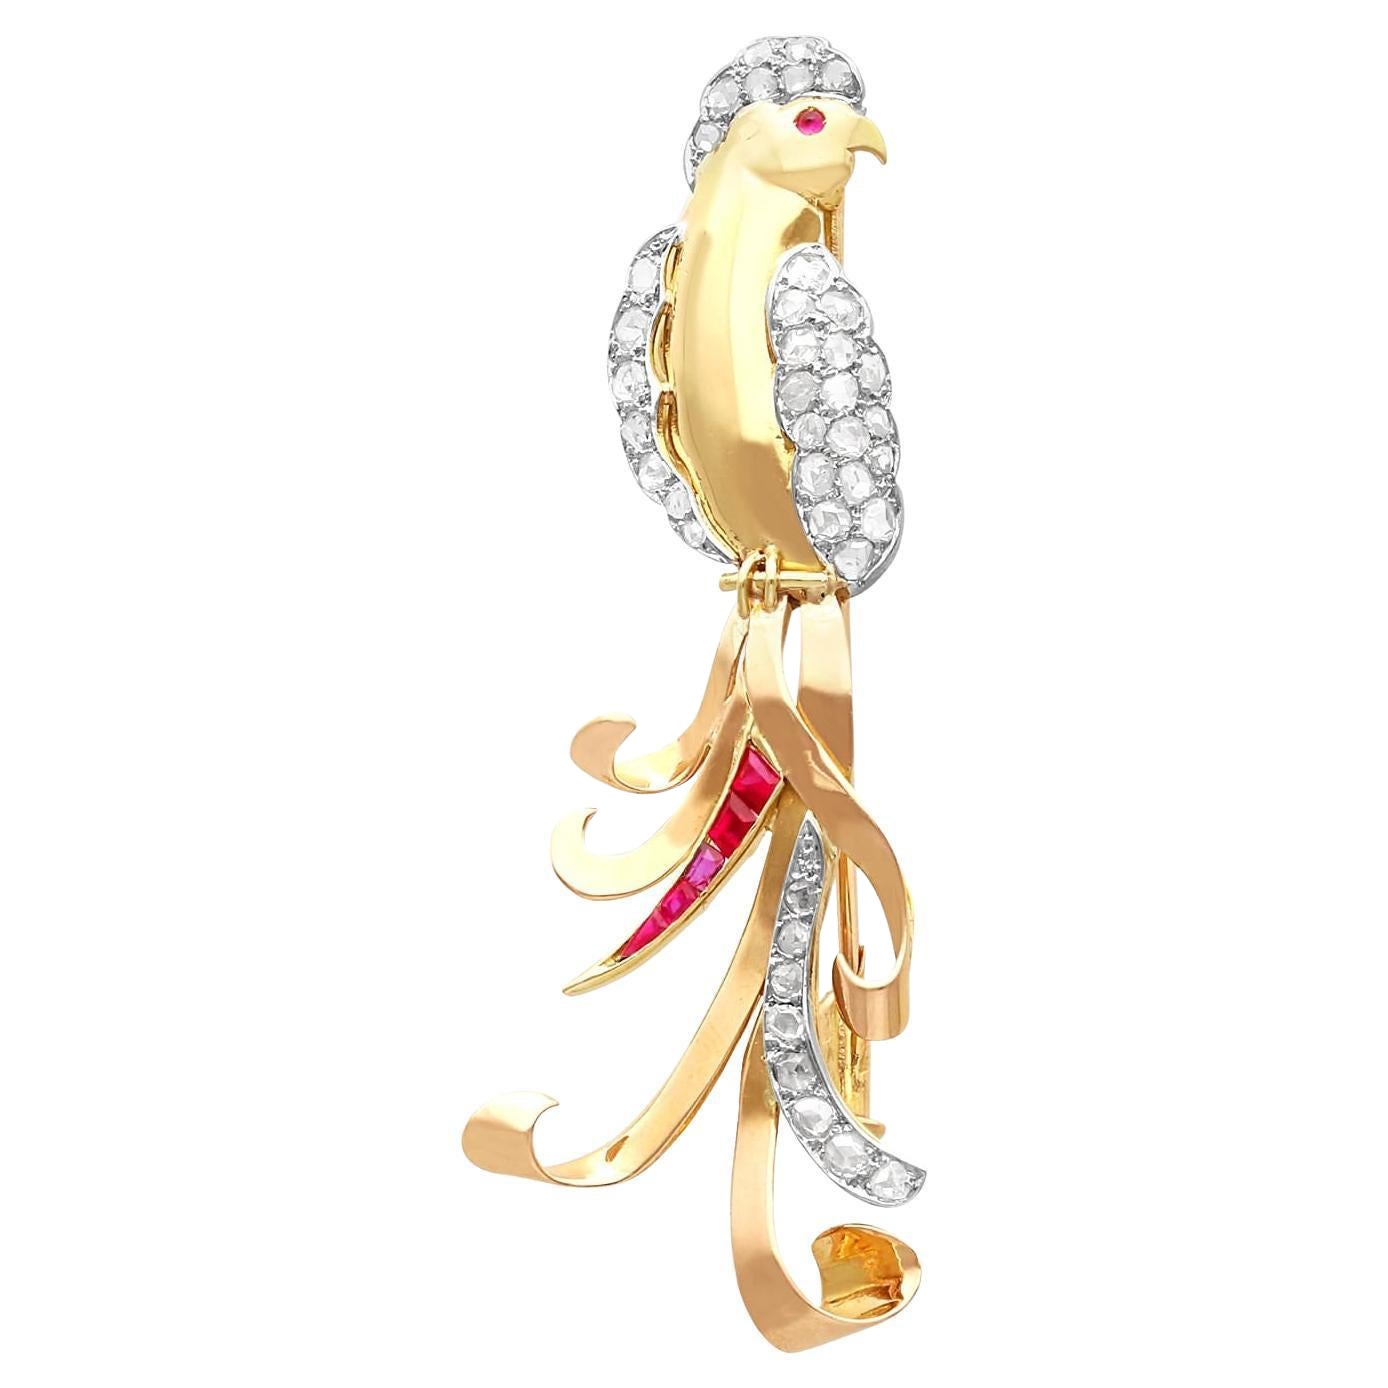 Vintage 1940s 1.16 Carat Diamond and Ruby 18k Yellow Gold Bird Brooch For Sale